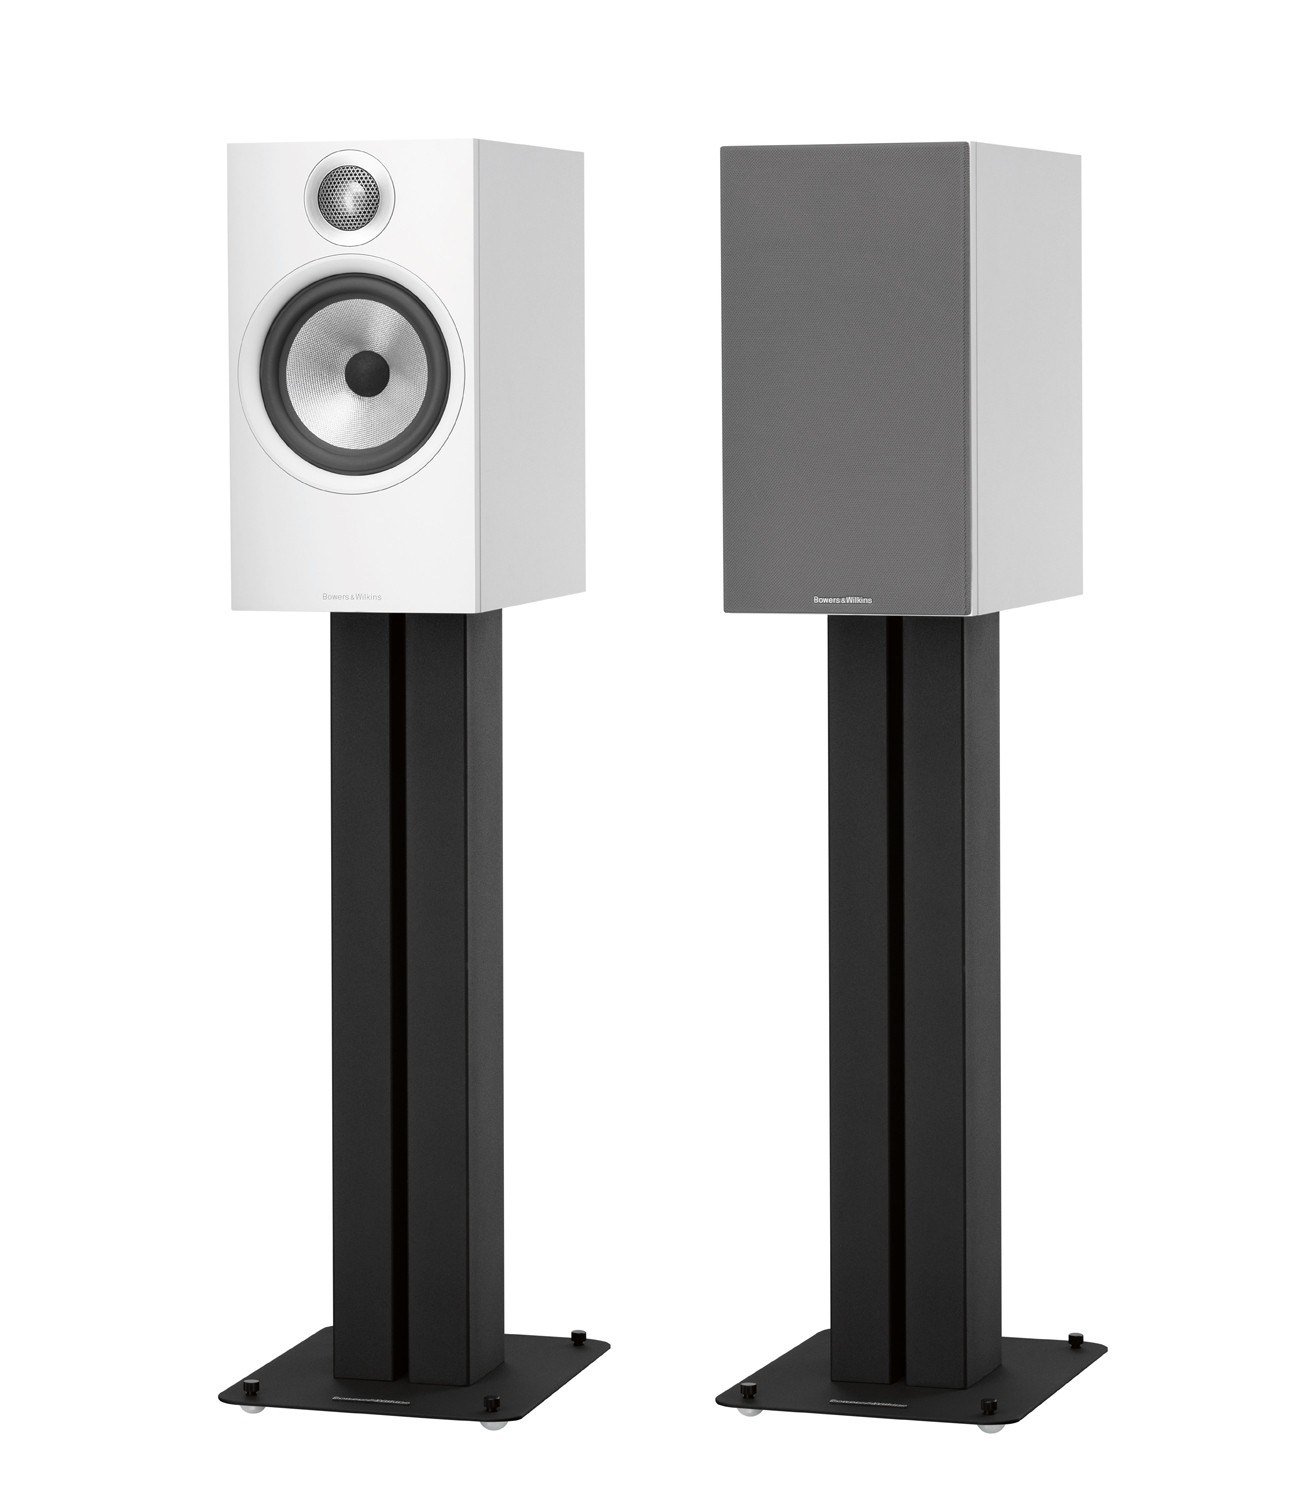 Bowers & Wilkins 606 white